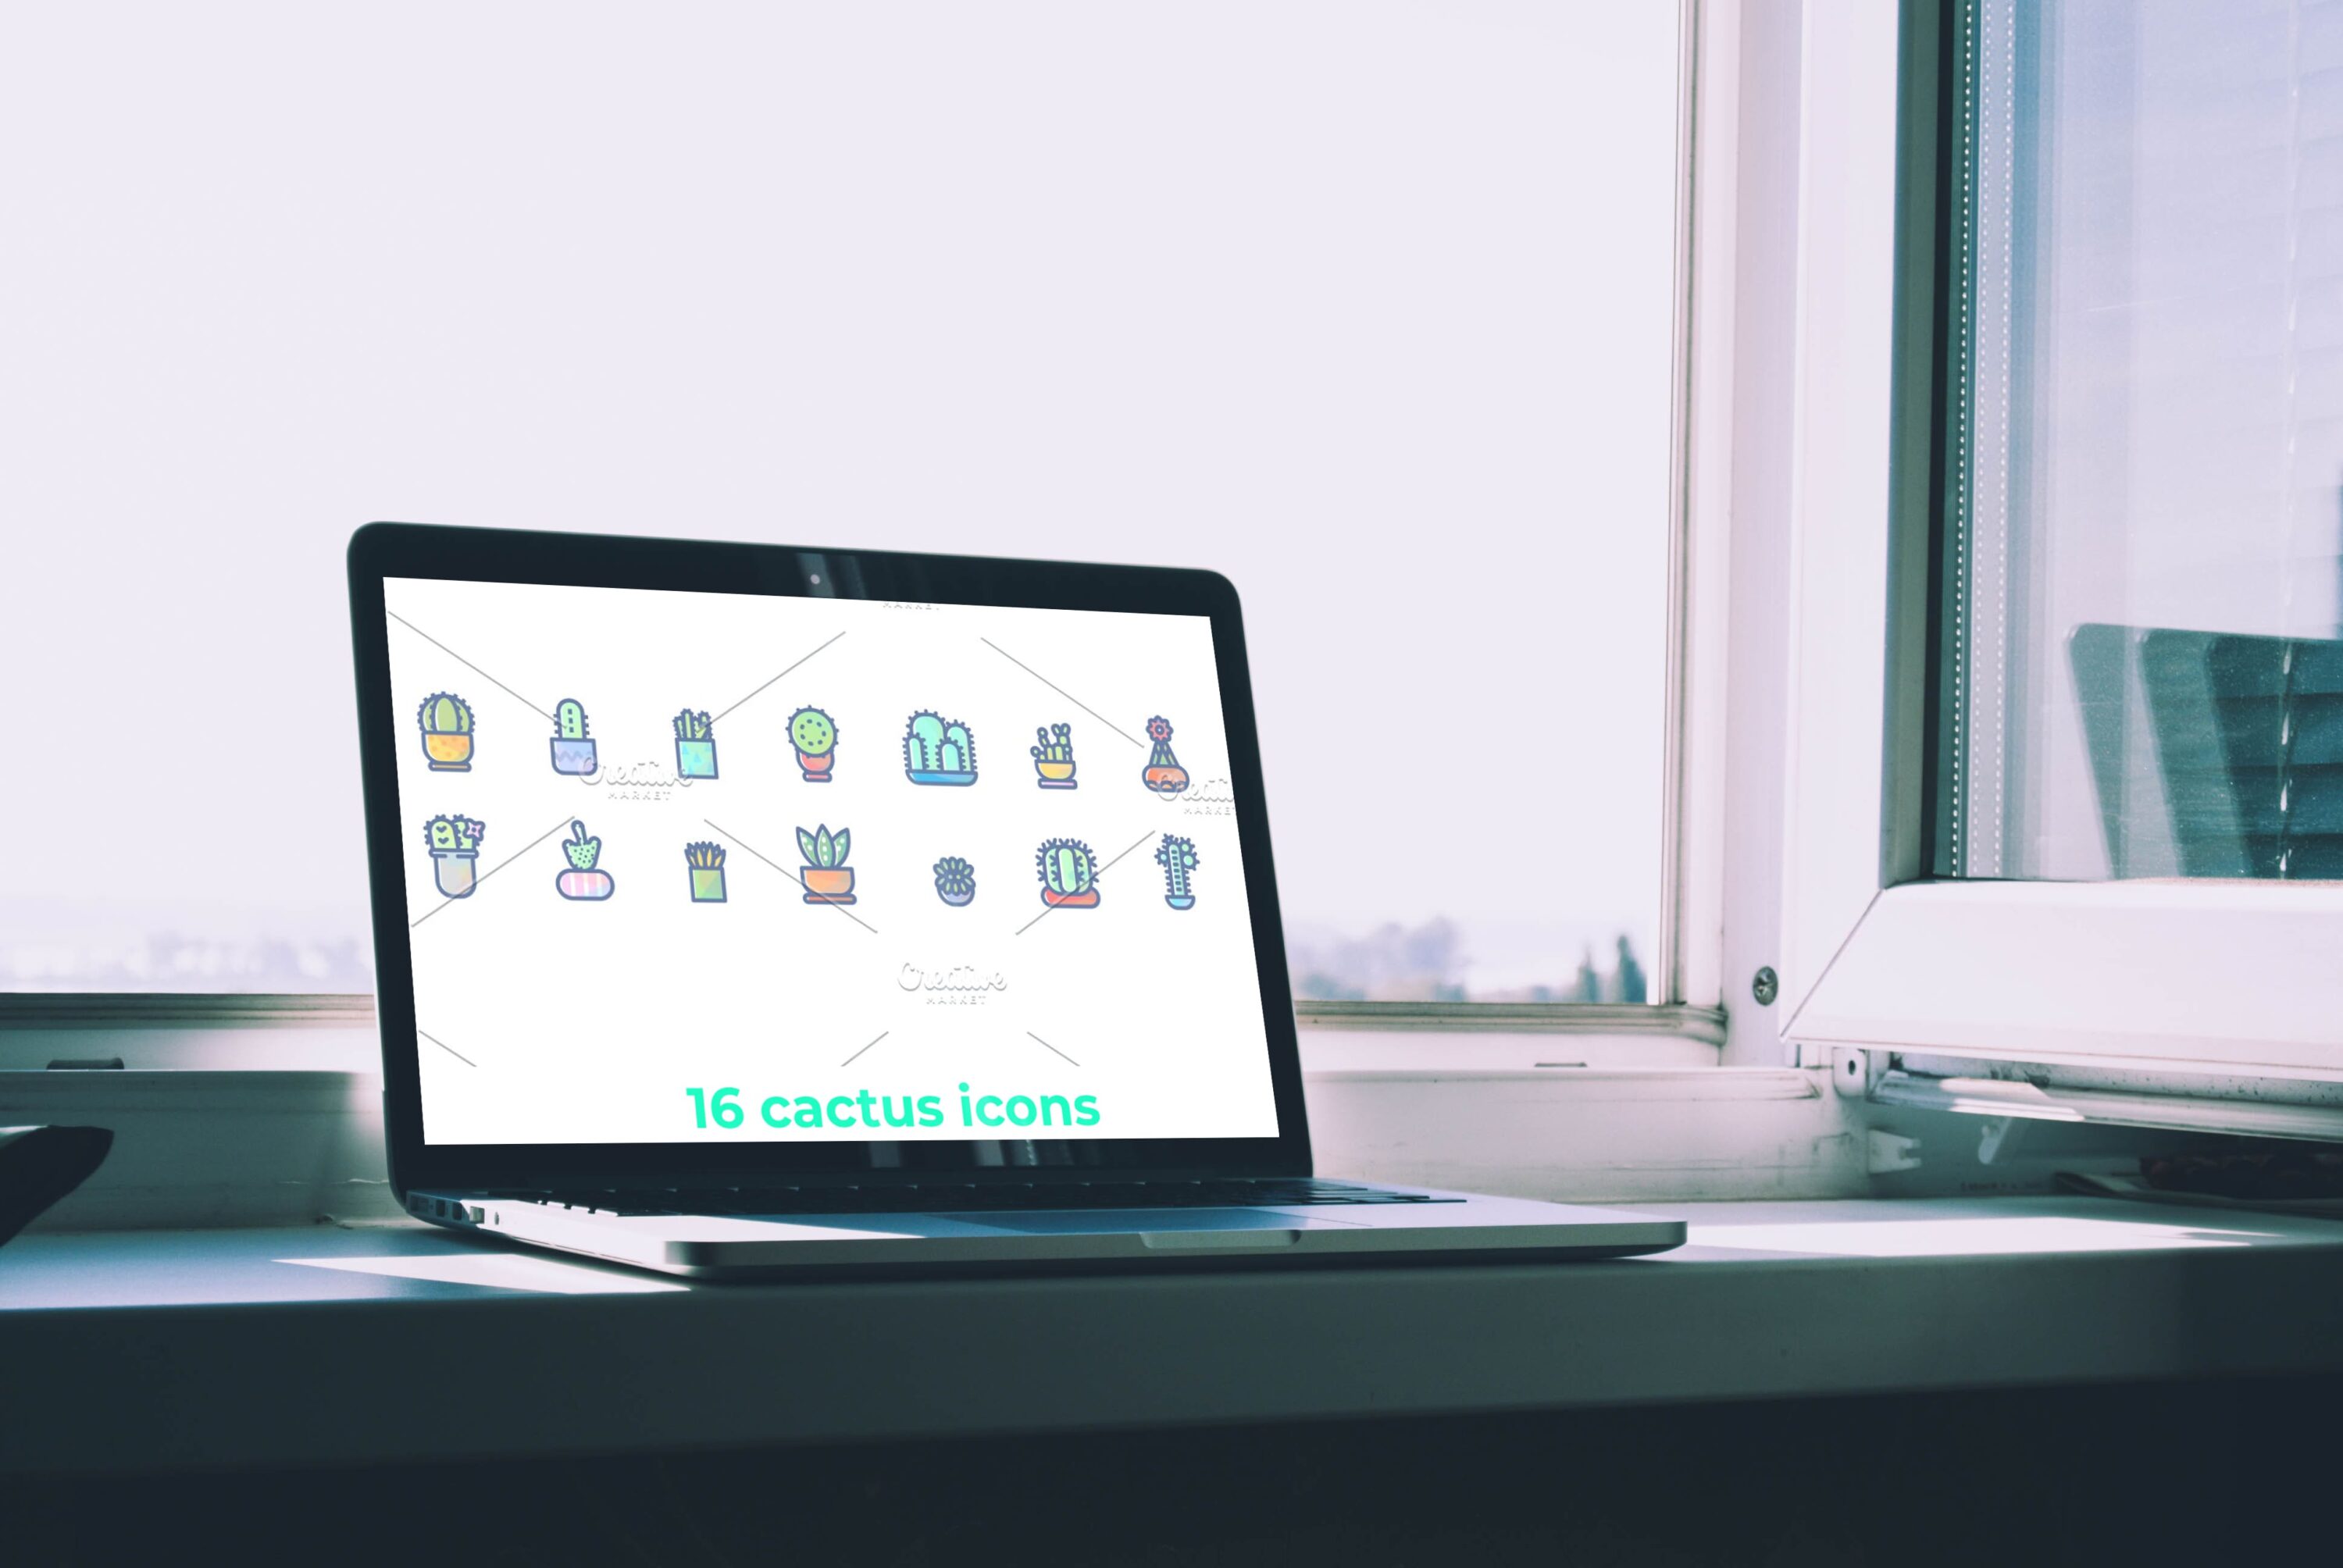 Laptop option of the 16 cactus icons.